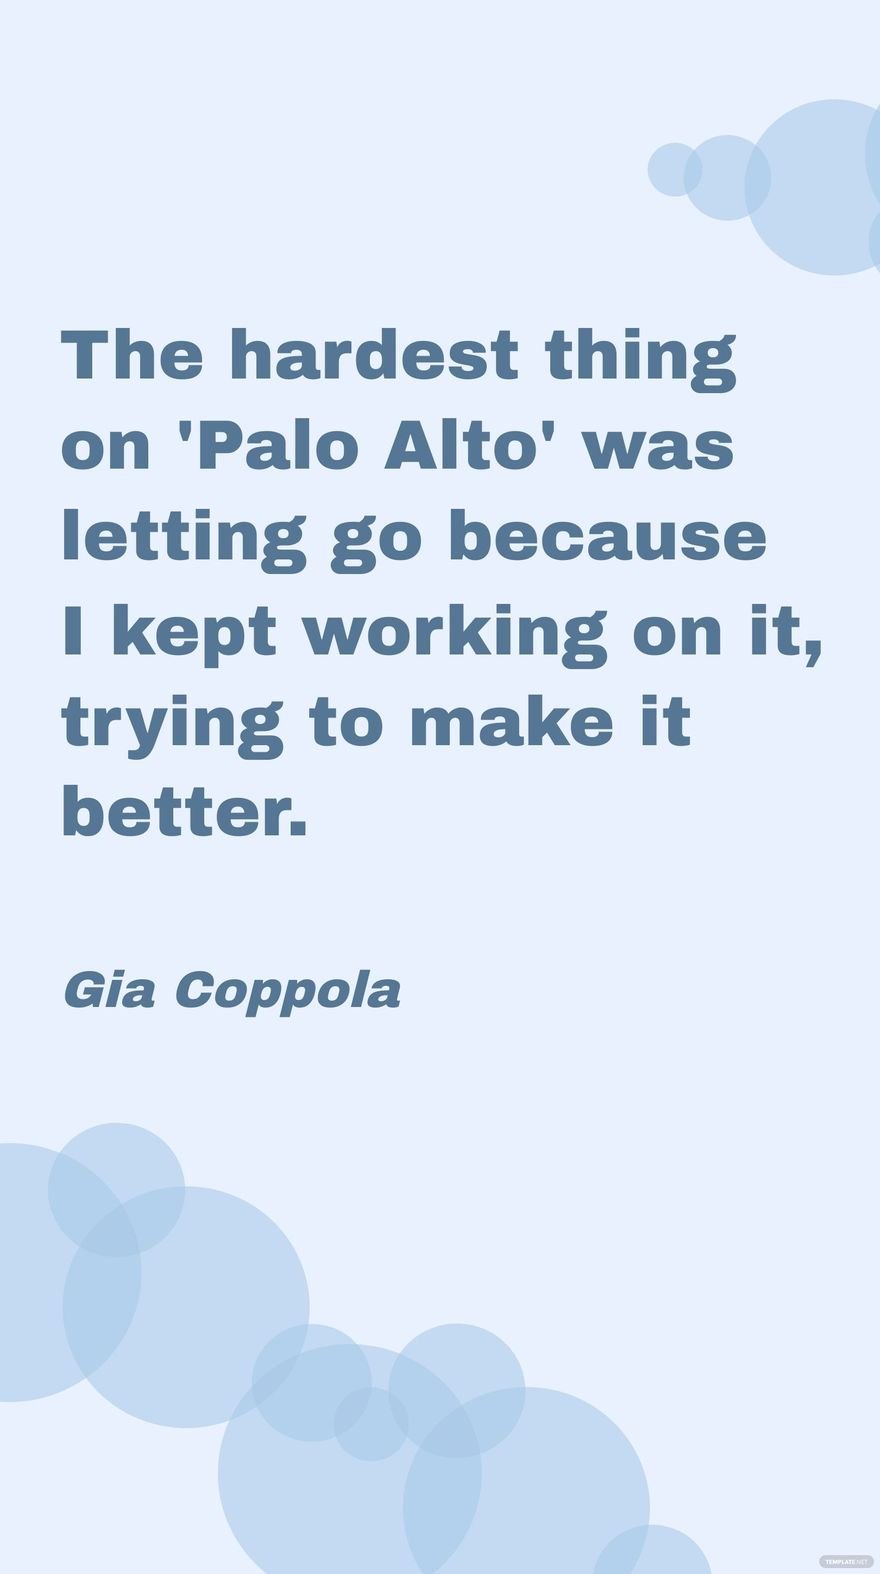 Gia Coppola - The hardest thing on 'Palo Alto' was letting go because I kept working on it, trying to make it better. in JPG